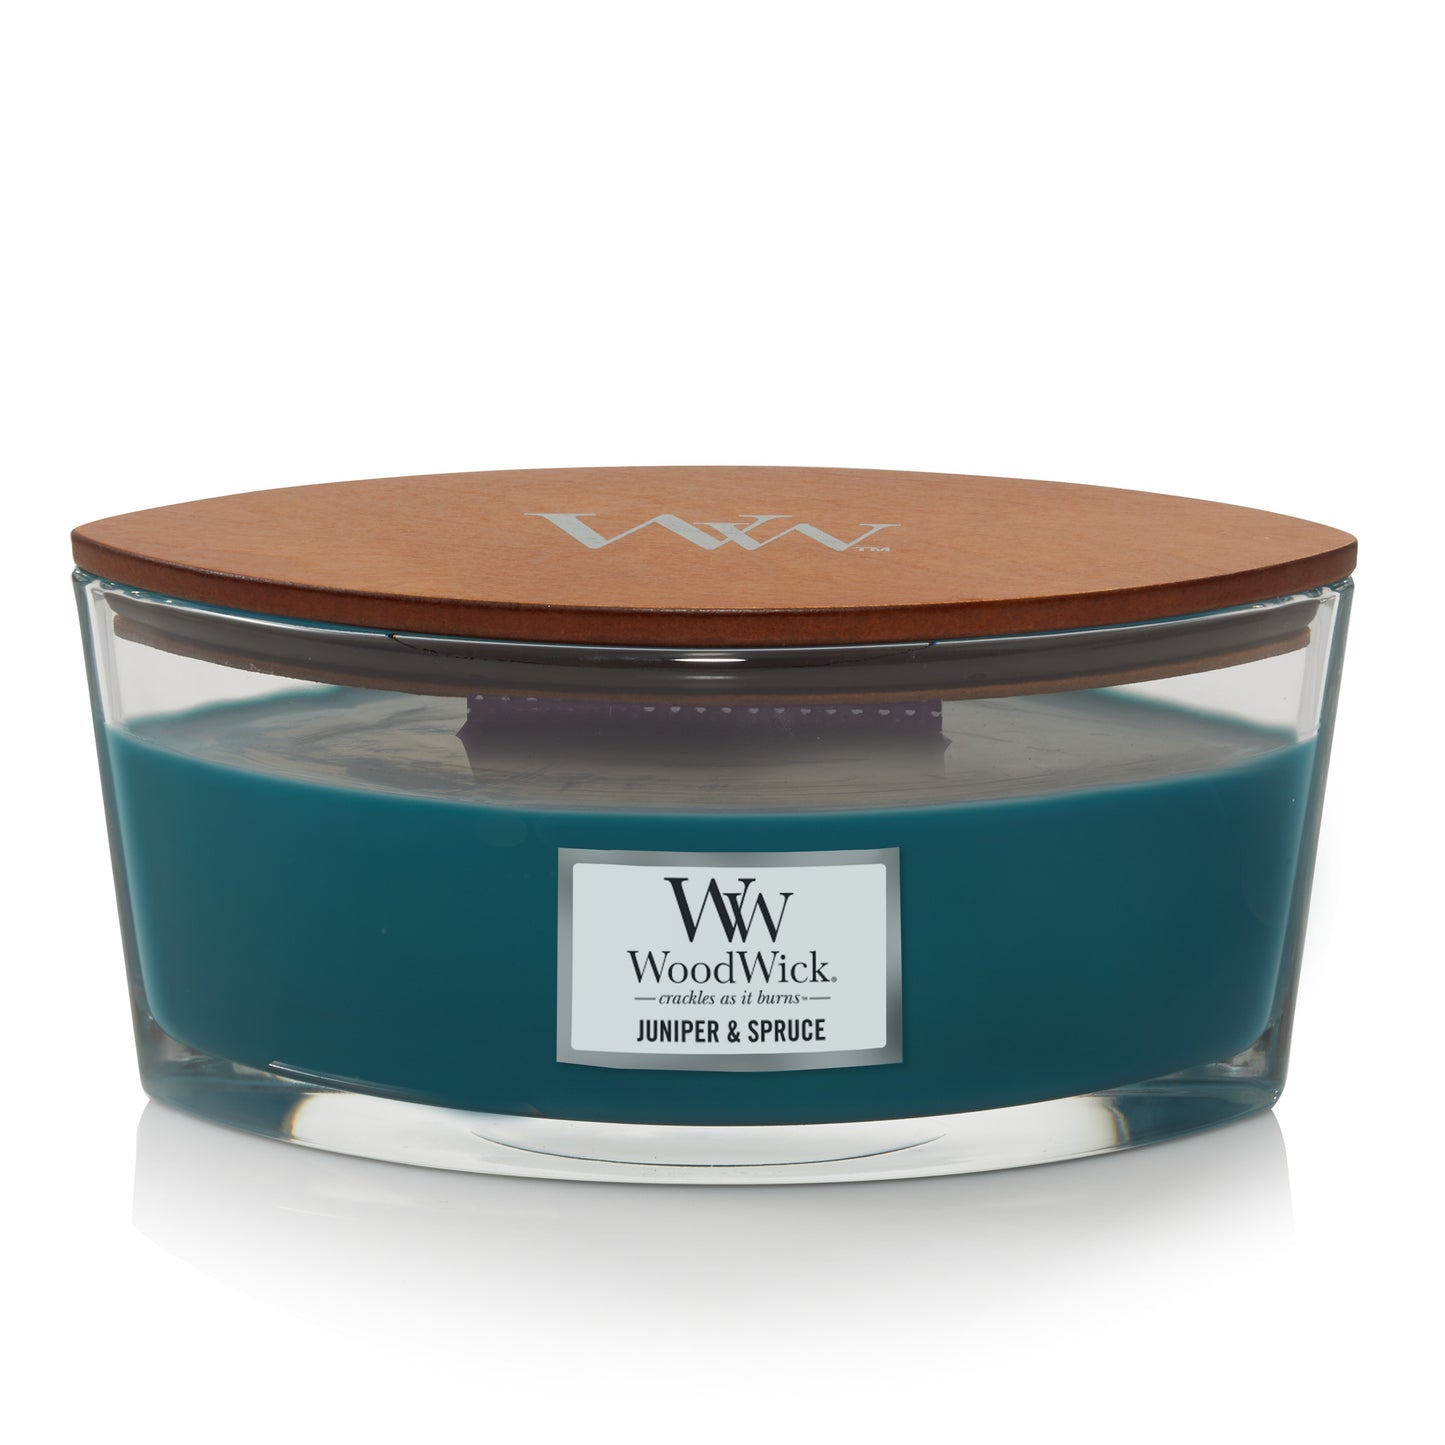 JUNIPER and SPRUCE HearthWick Flame Large Scented Candle by WoodWick.